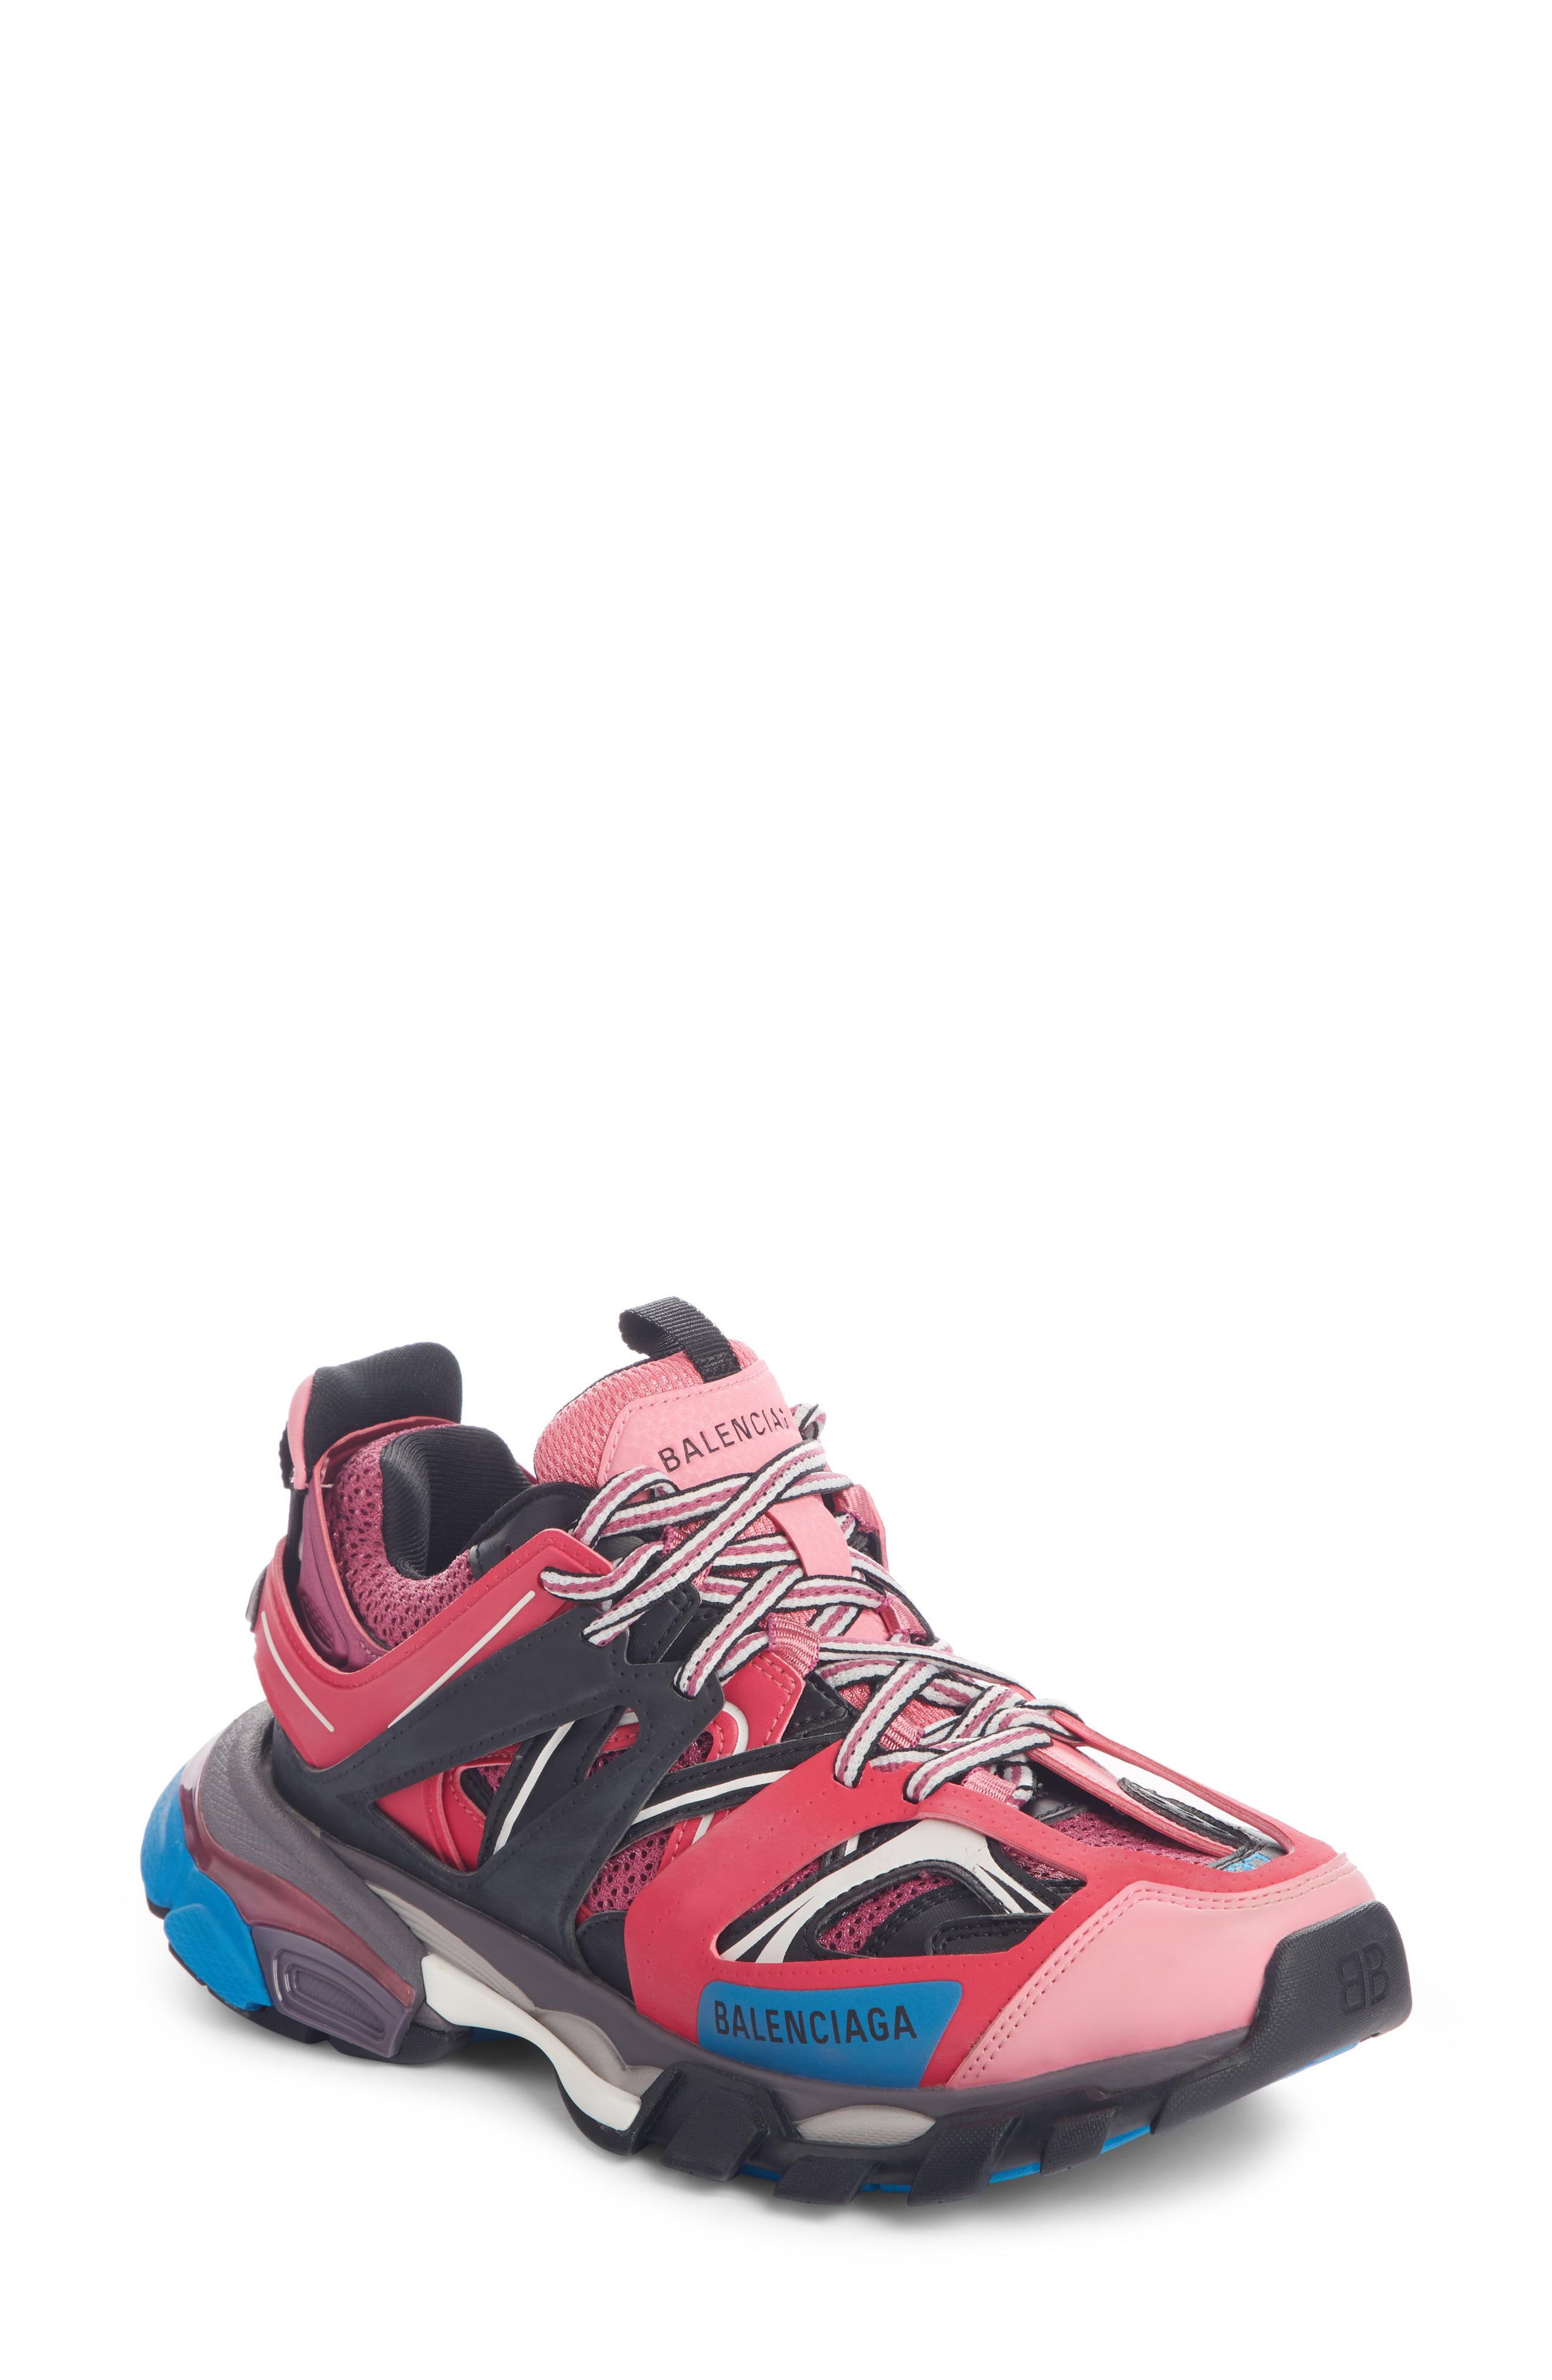 balenciaga track sneakers pink and blue